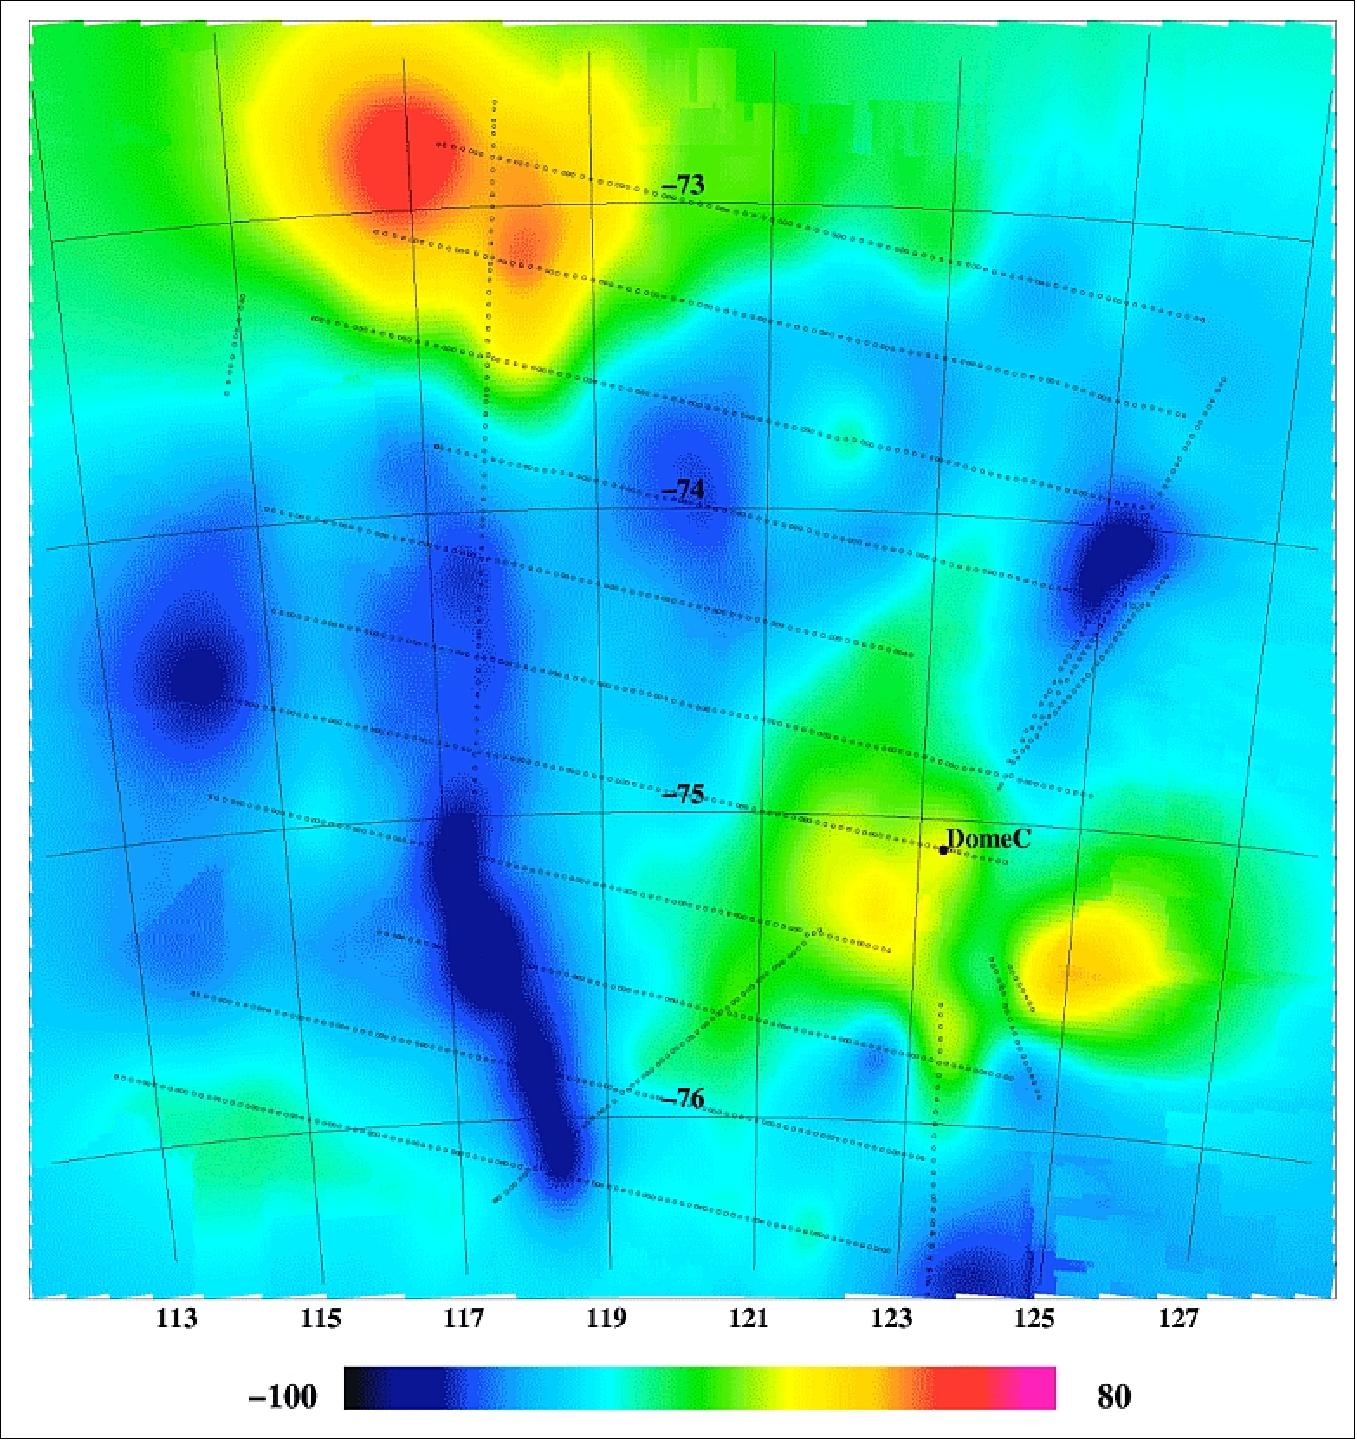 Figure 92: Different data reveal similar patterns under the ice: Gravity anomalies at Dome-C compared to brightness temperature at Dome-C (image credit: S. Kristensen and F. Forsberg, DTU)